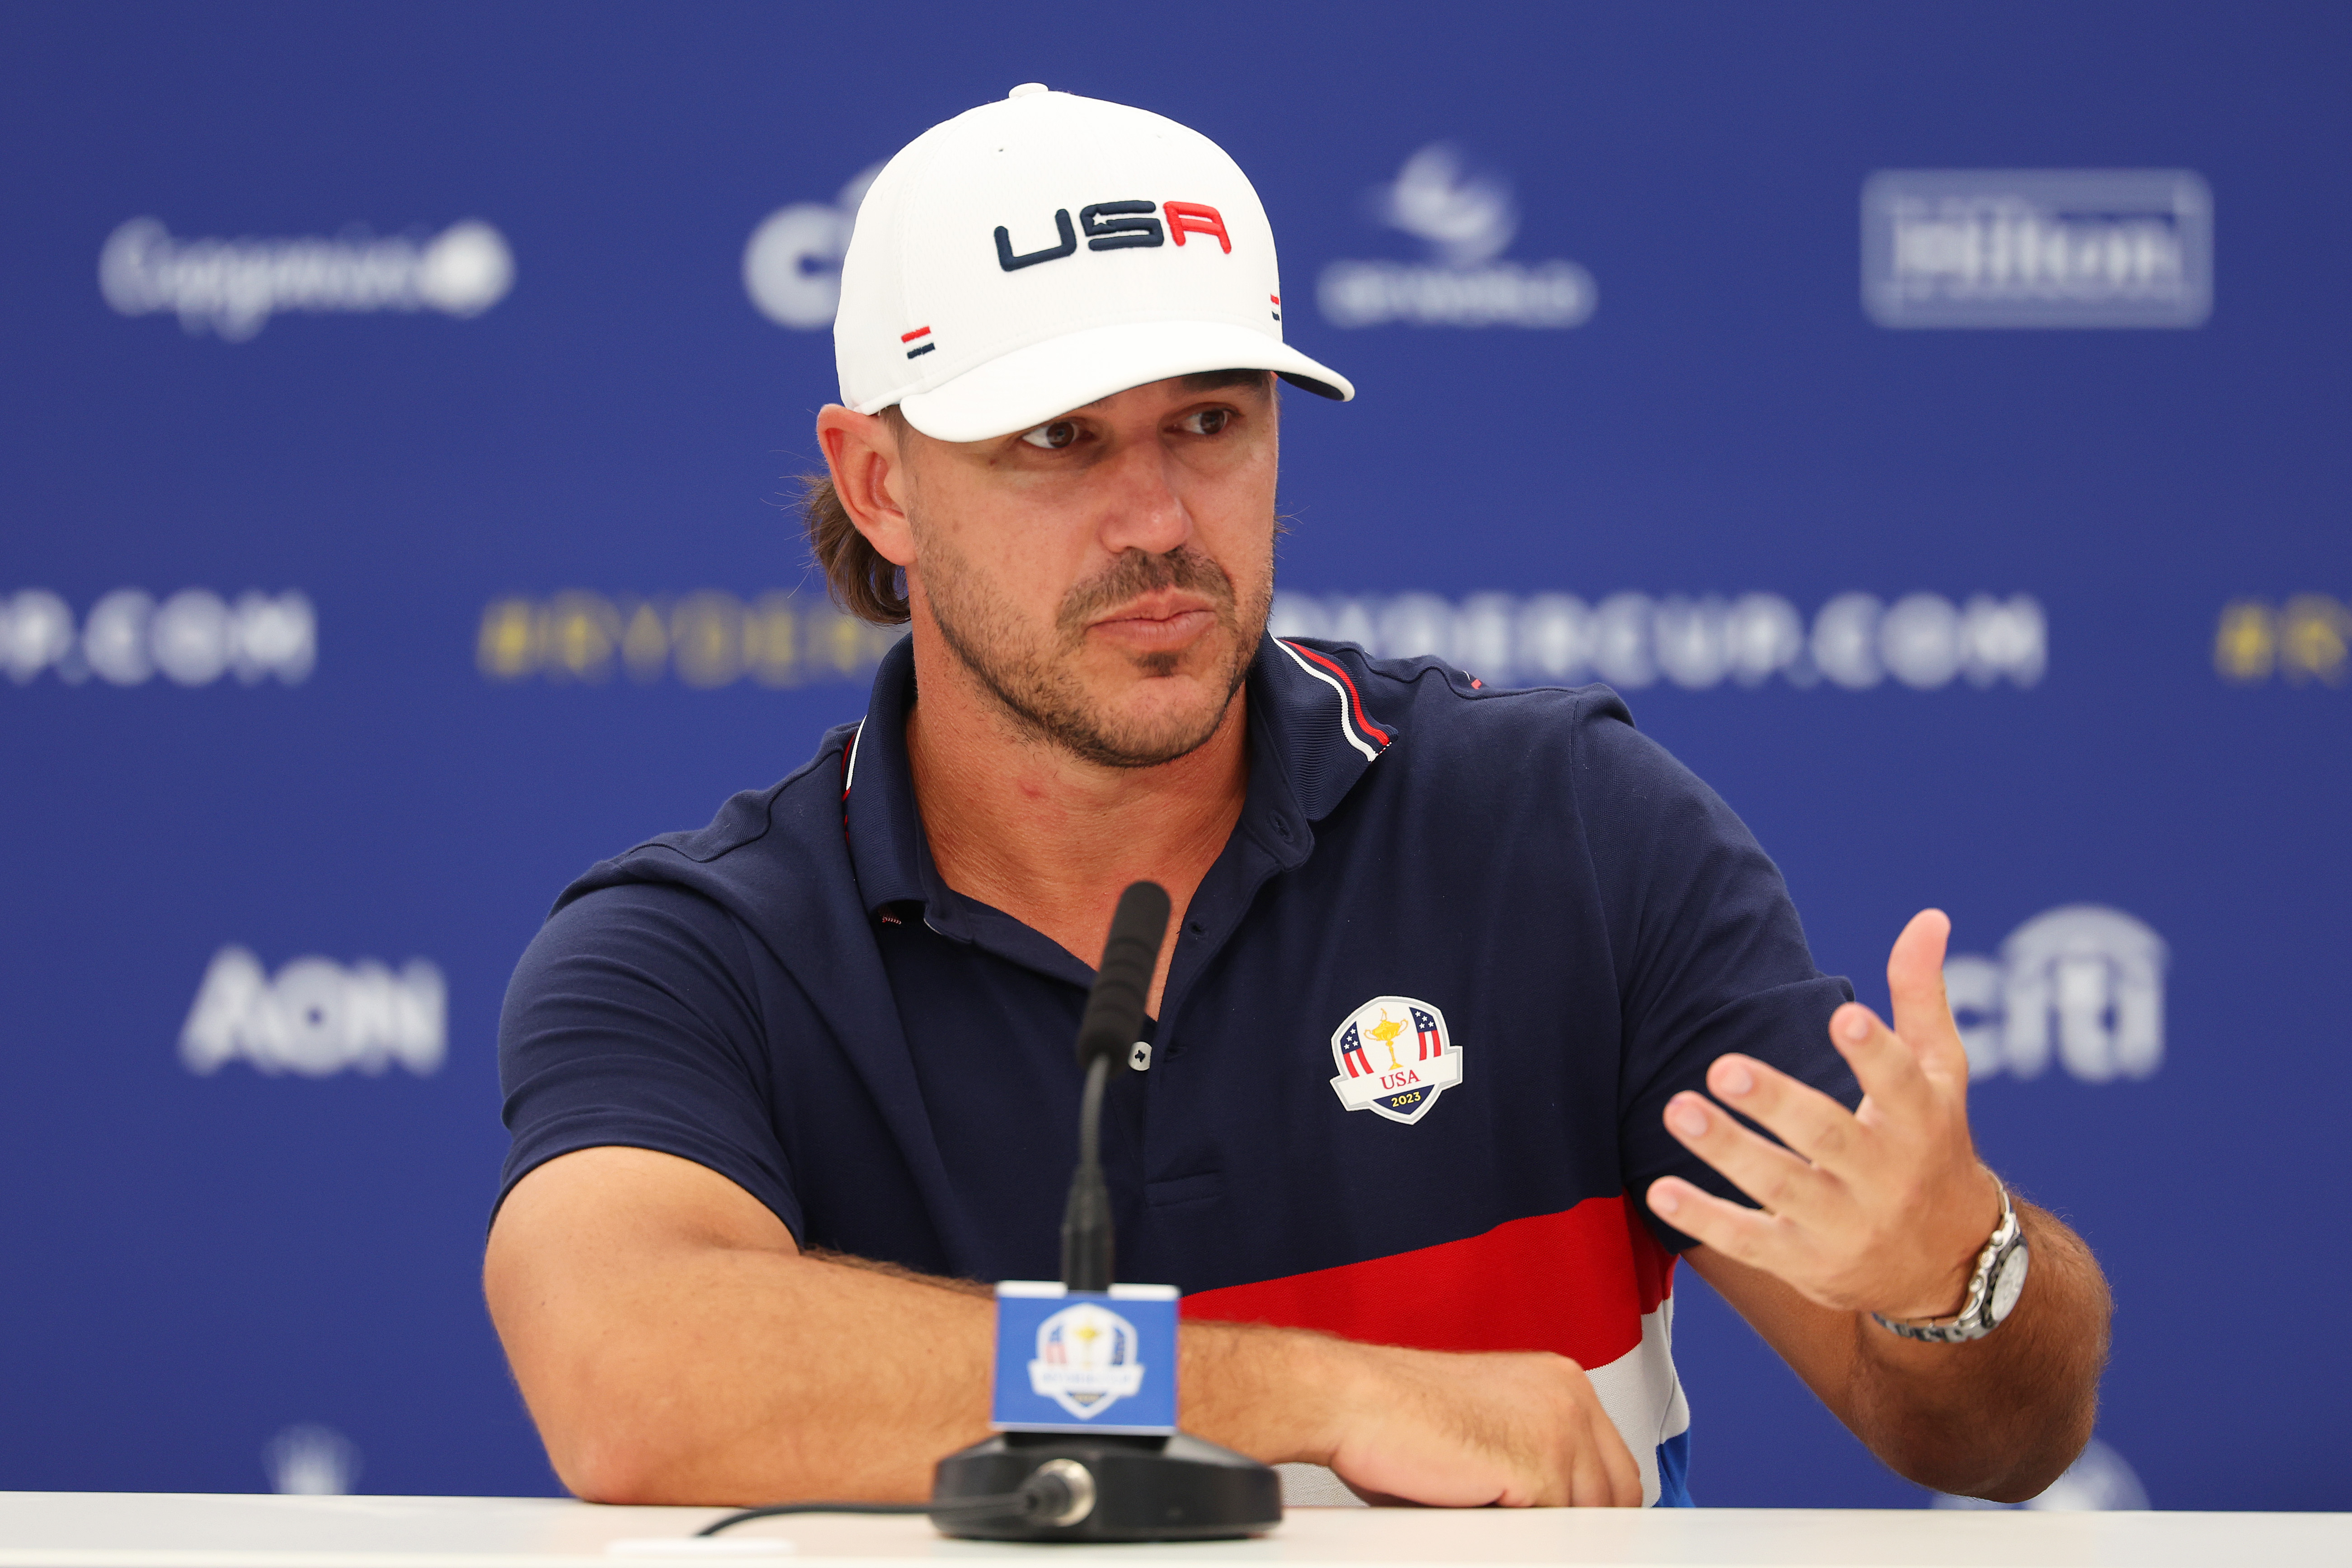 Brooks Koepka Doesn’t Want To Hear Excuses About LIV Golf and the Ryder Cup